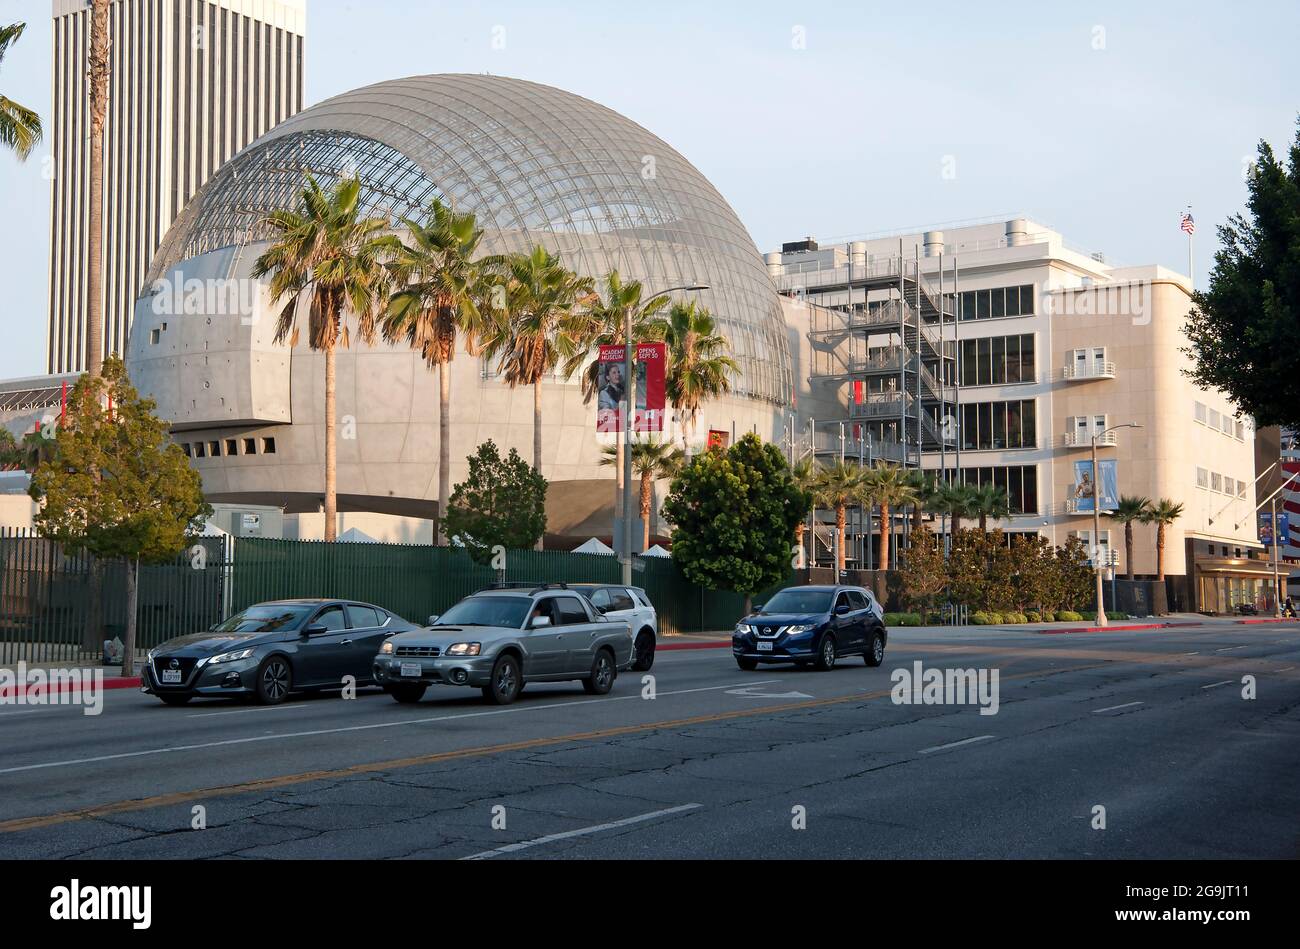 L'Academy Museum of Motion Pictures, Los Angeles, California Foto Stock